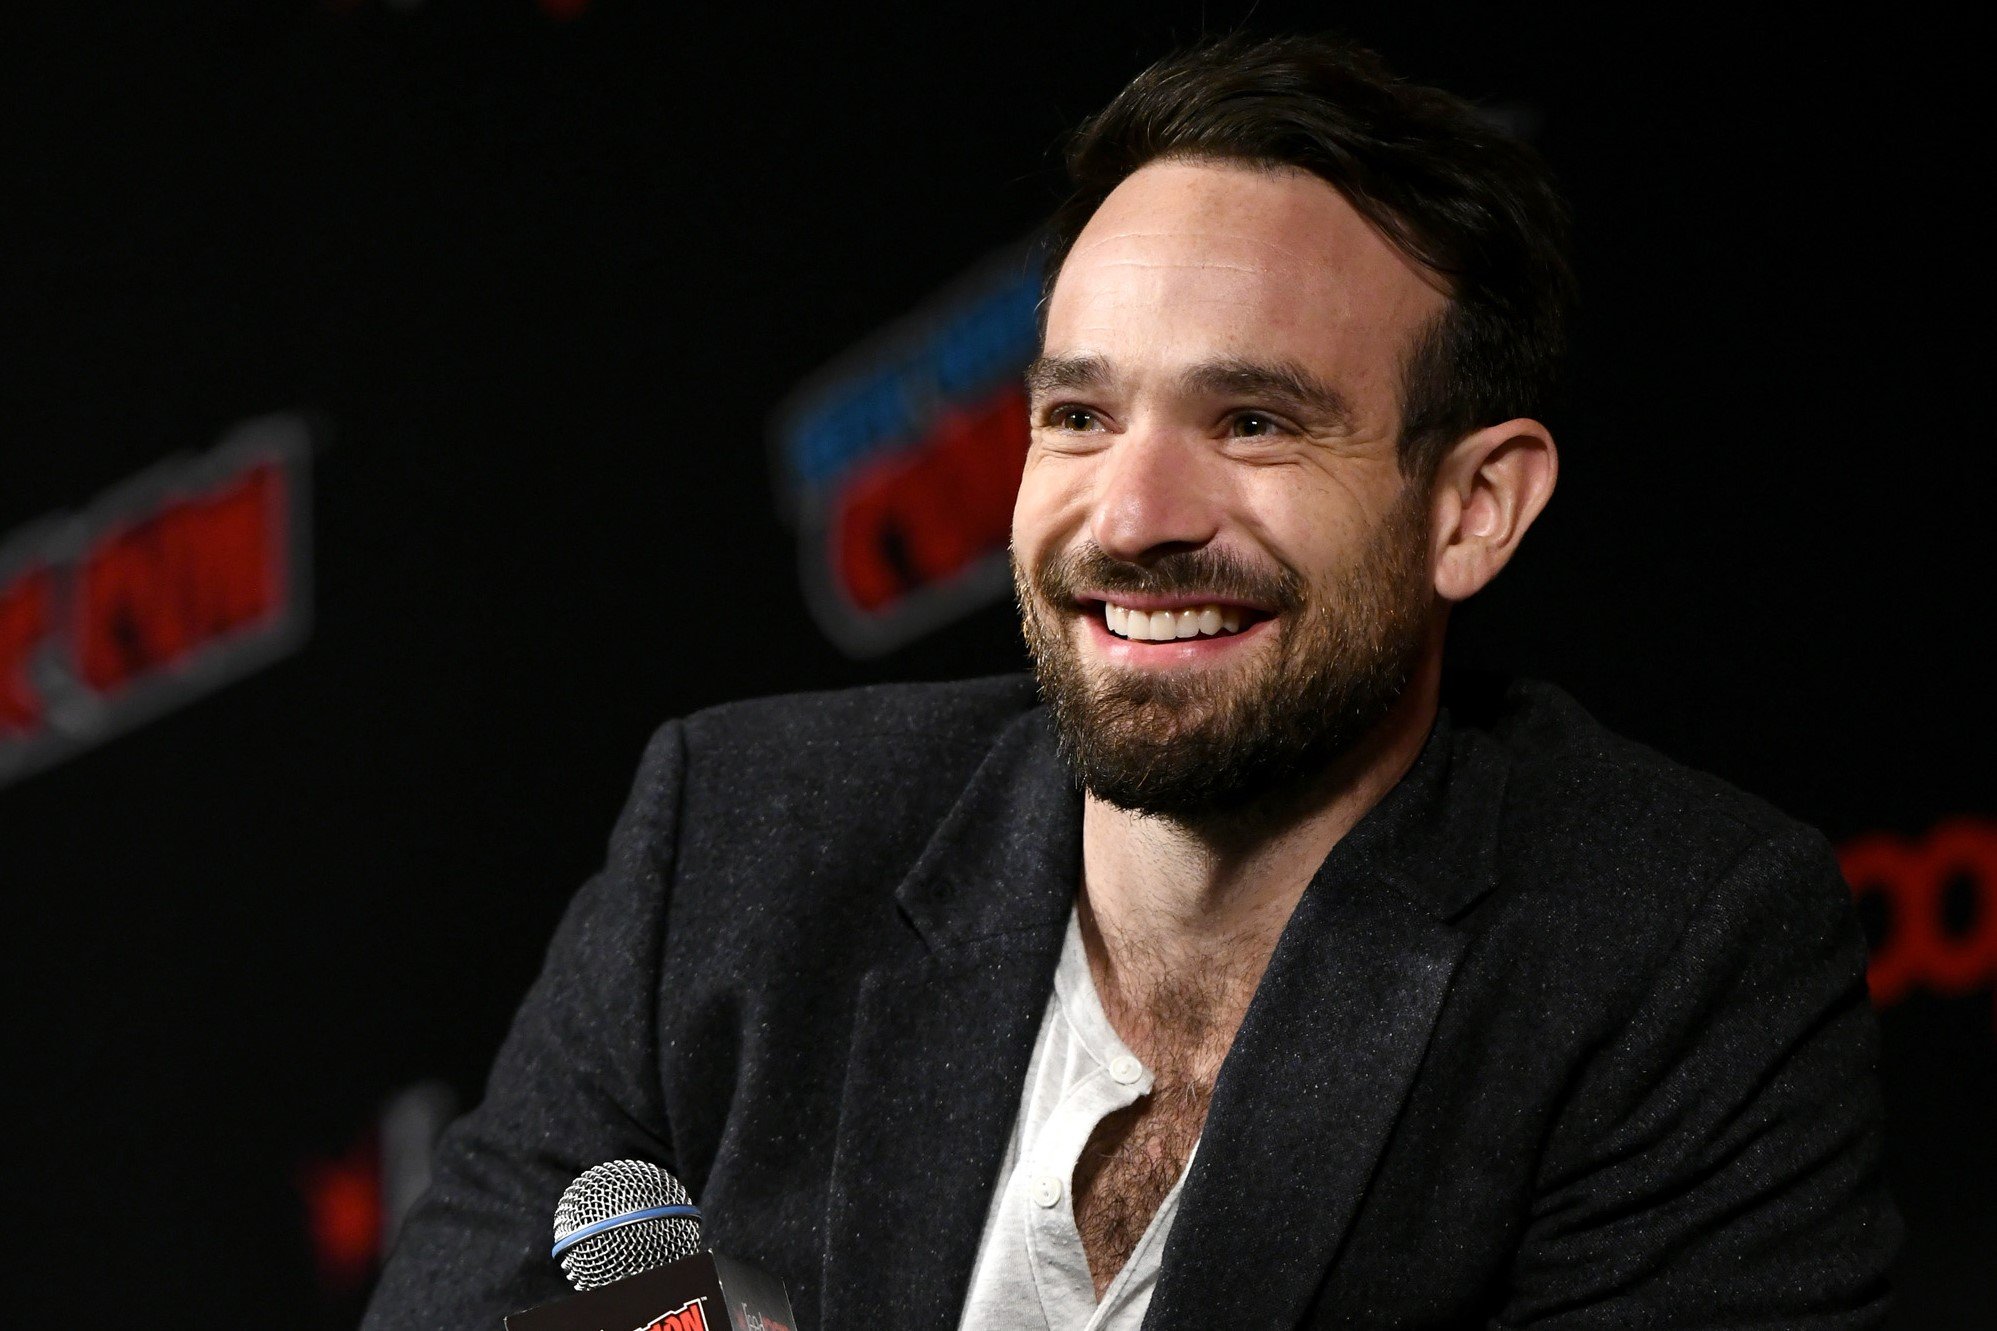 'Spider-Man: No Way Home' actor Charlie Cox wears a black suit over a white shirt.